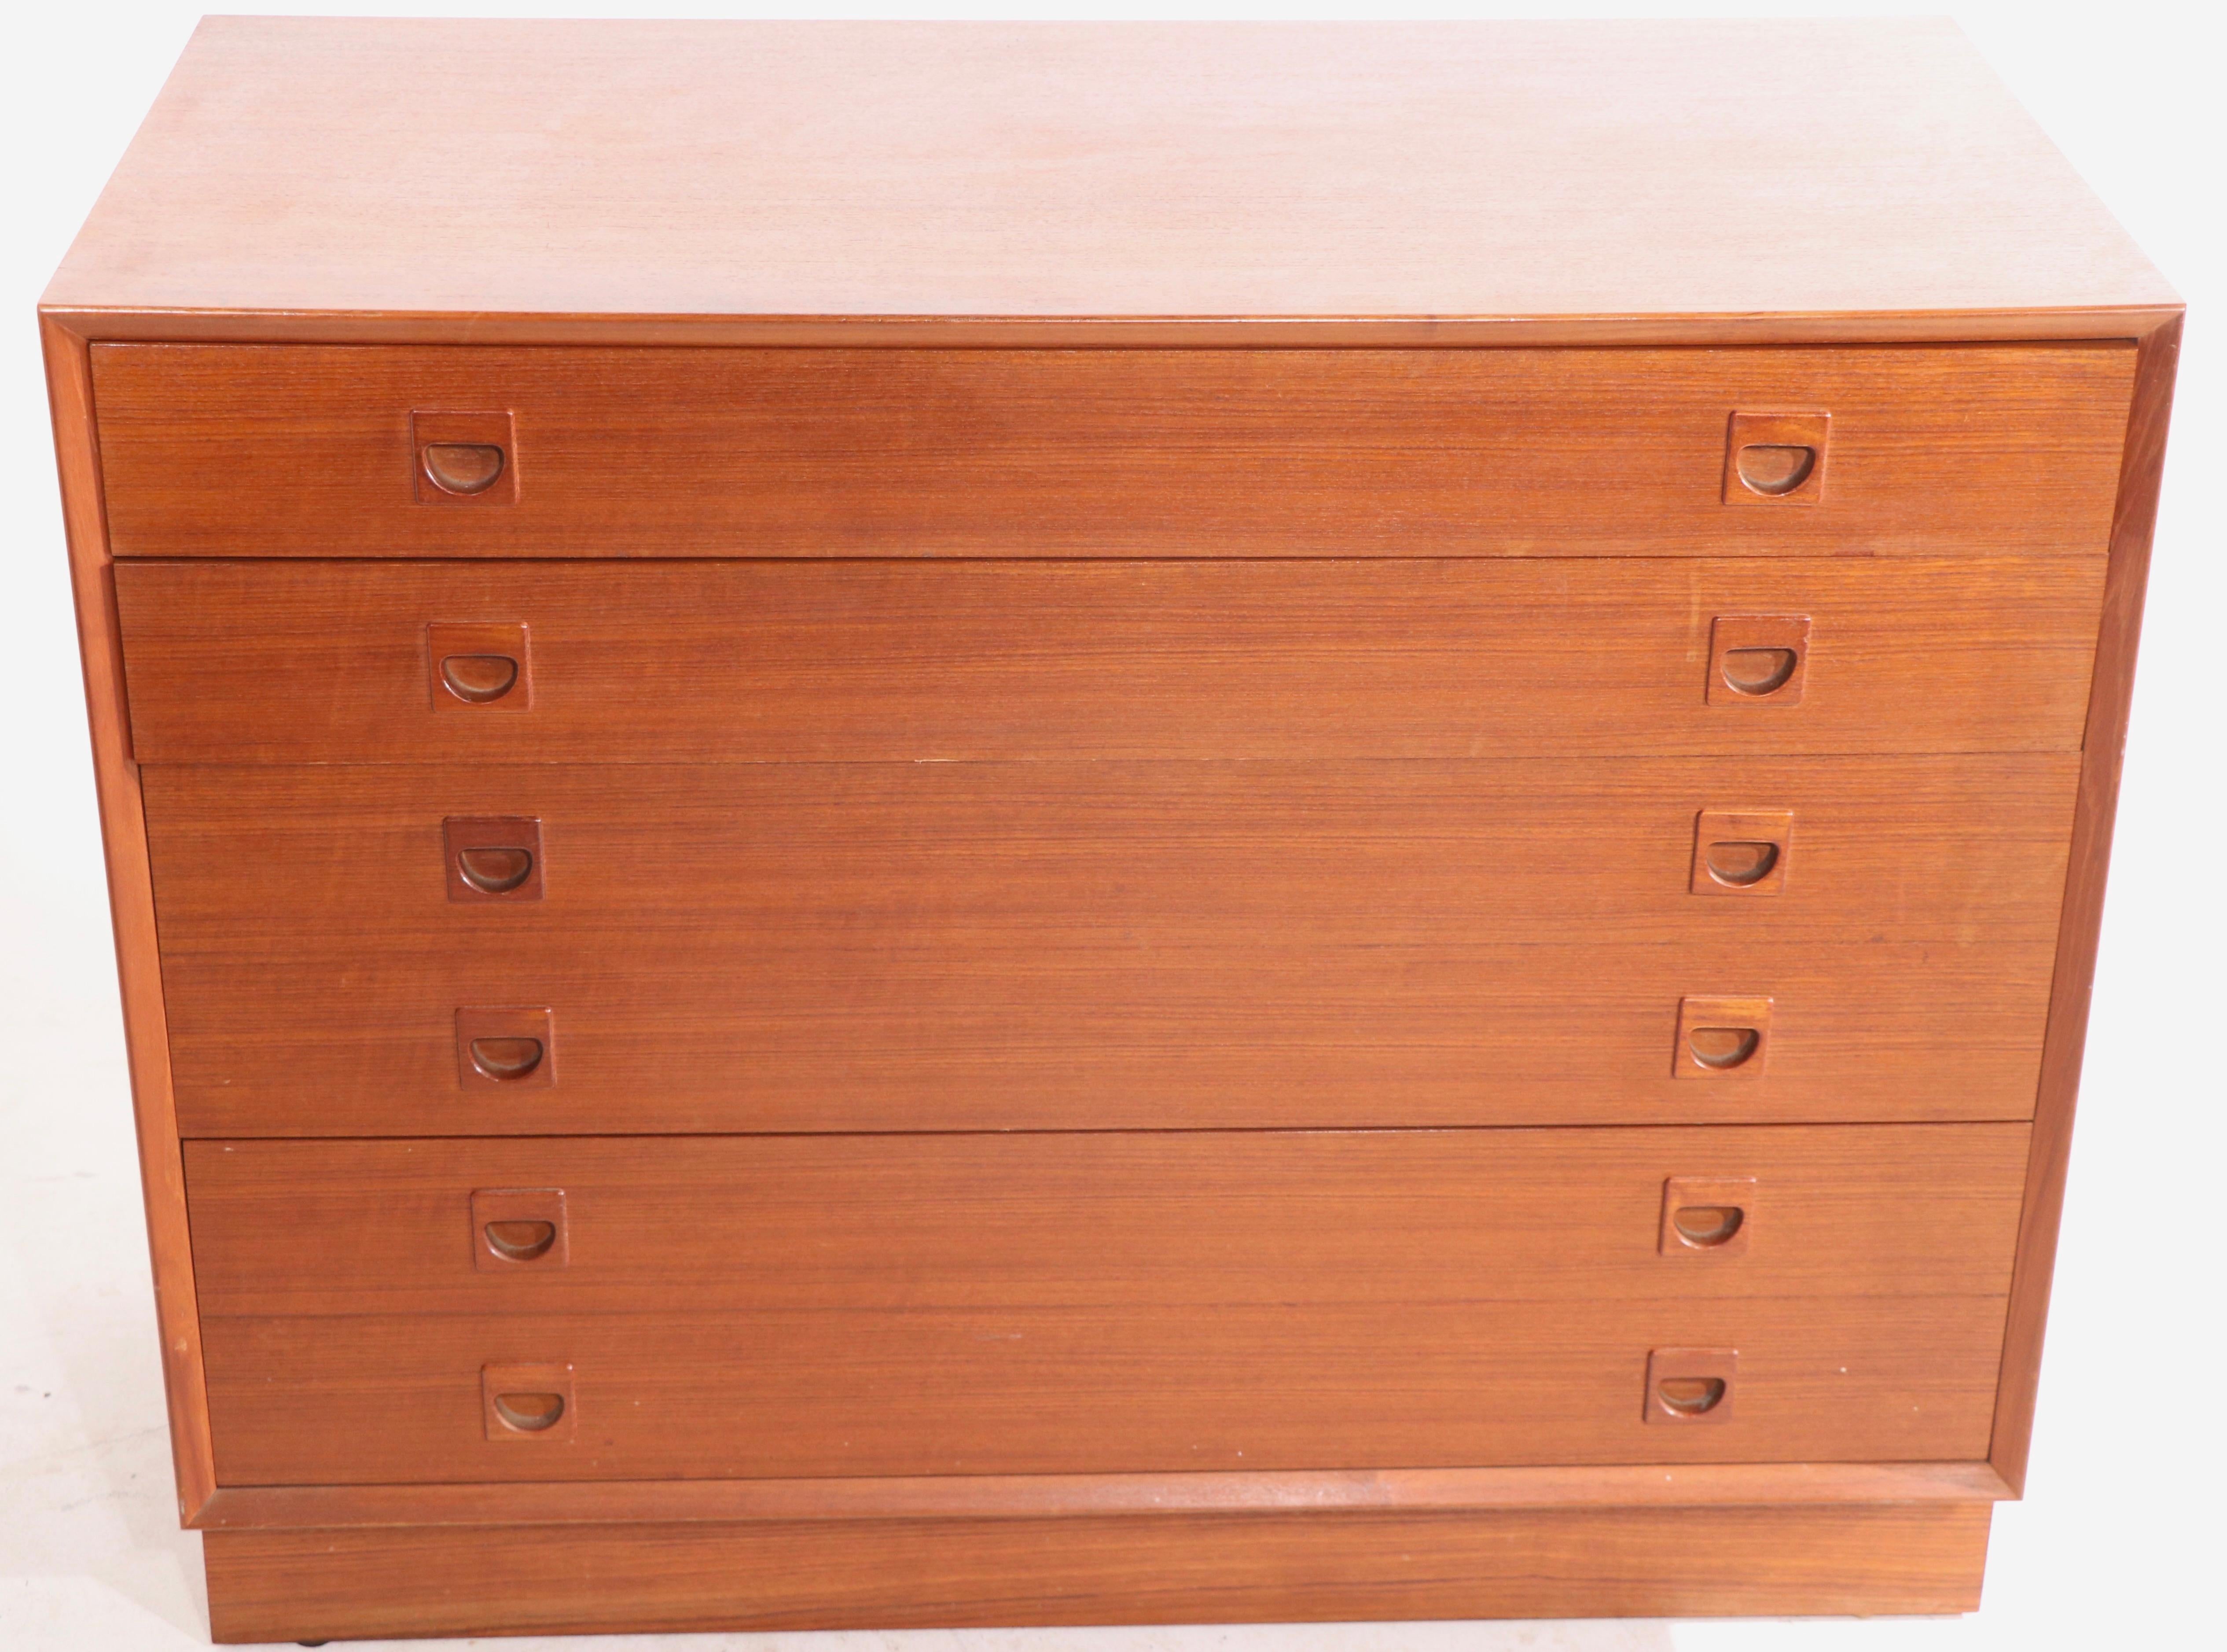 Stylish architectural pair of Danish style dressers attributed to G - Plan of Great Britain. Both chests are in good original, vintage estate condition, showing only light cosmetic wear, normal and consistent with age. Hard to find matching pairs of